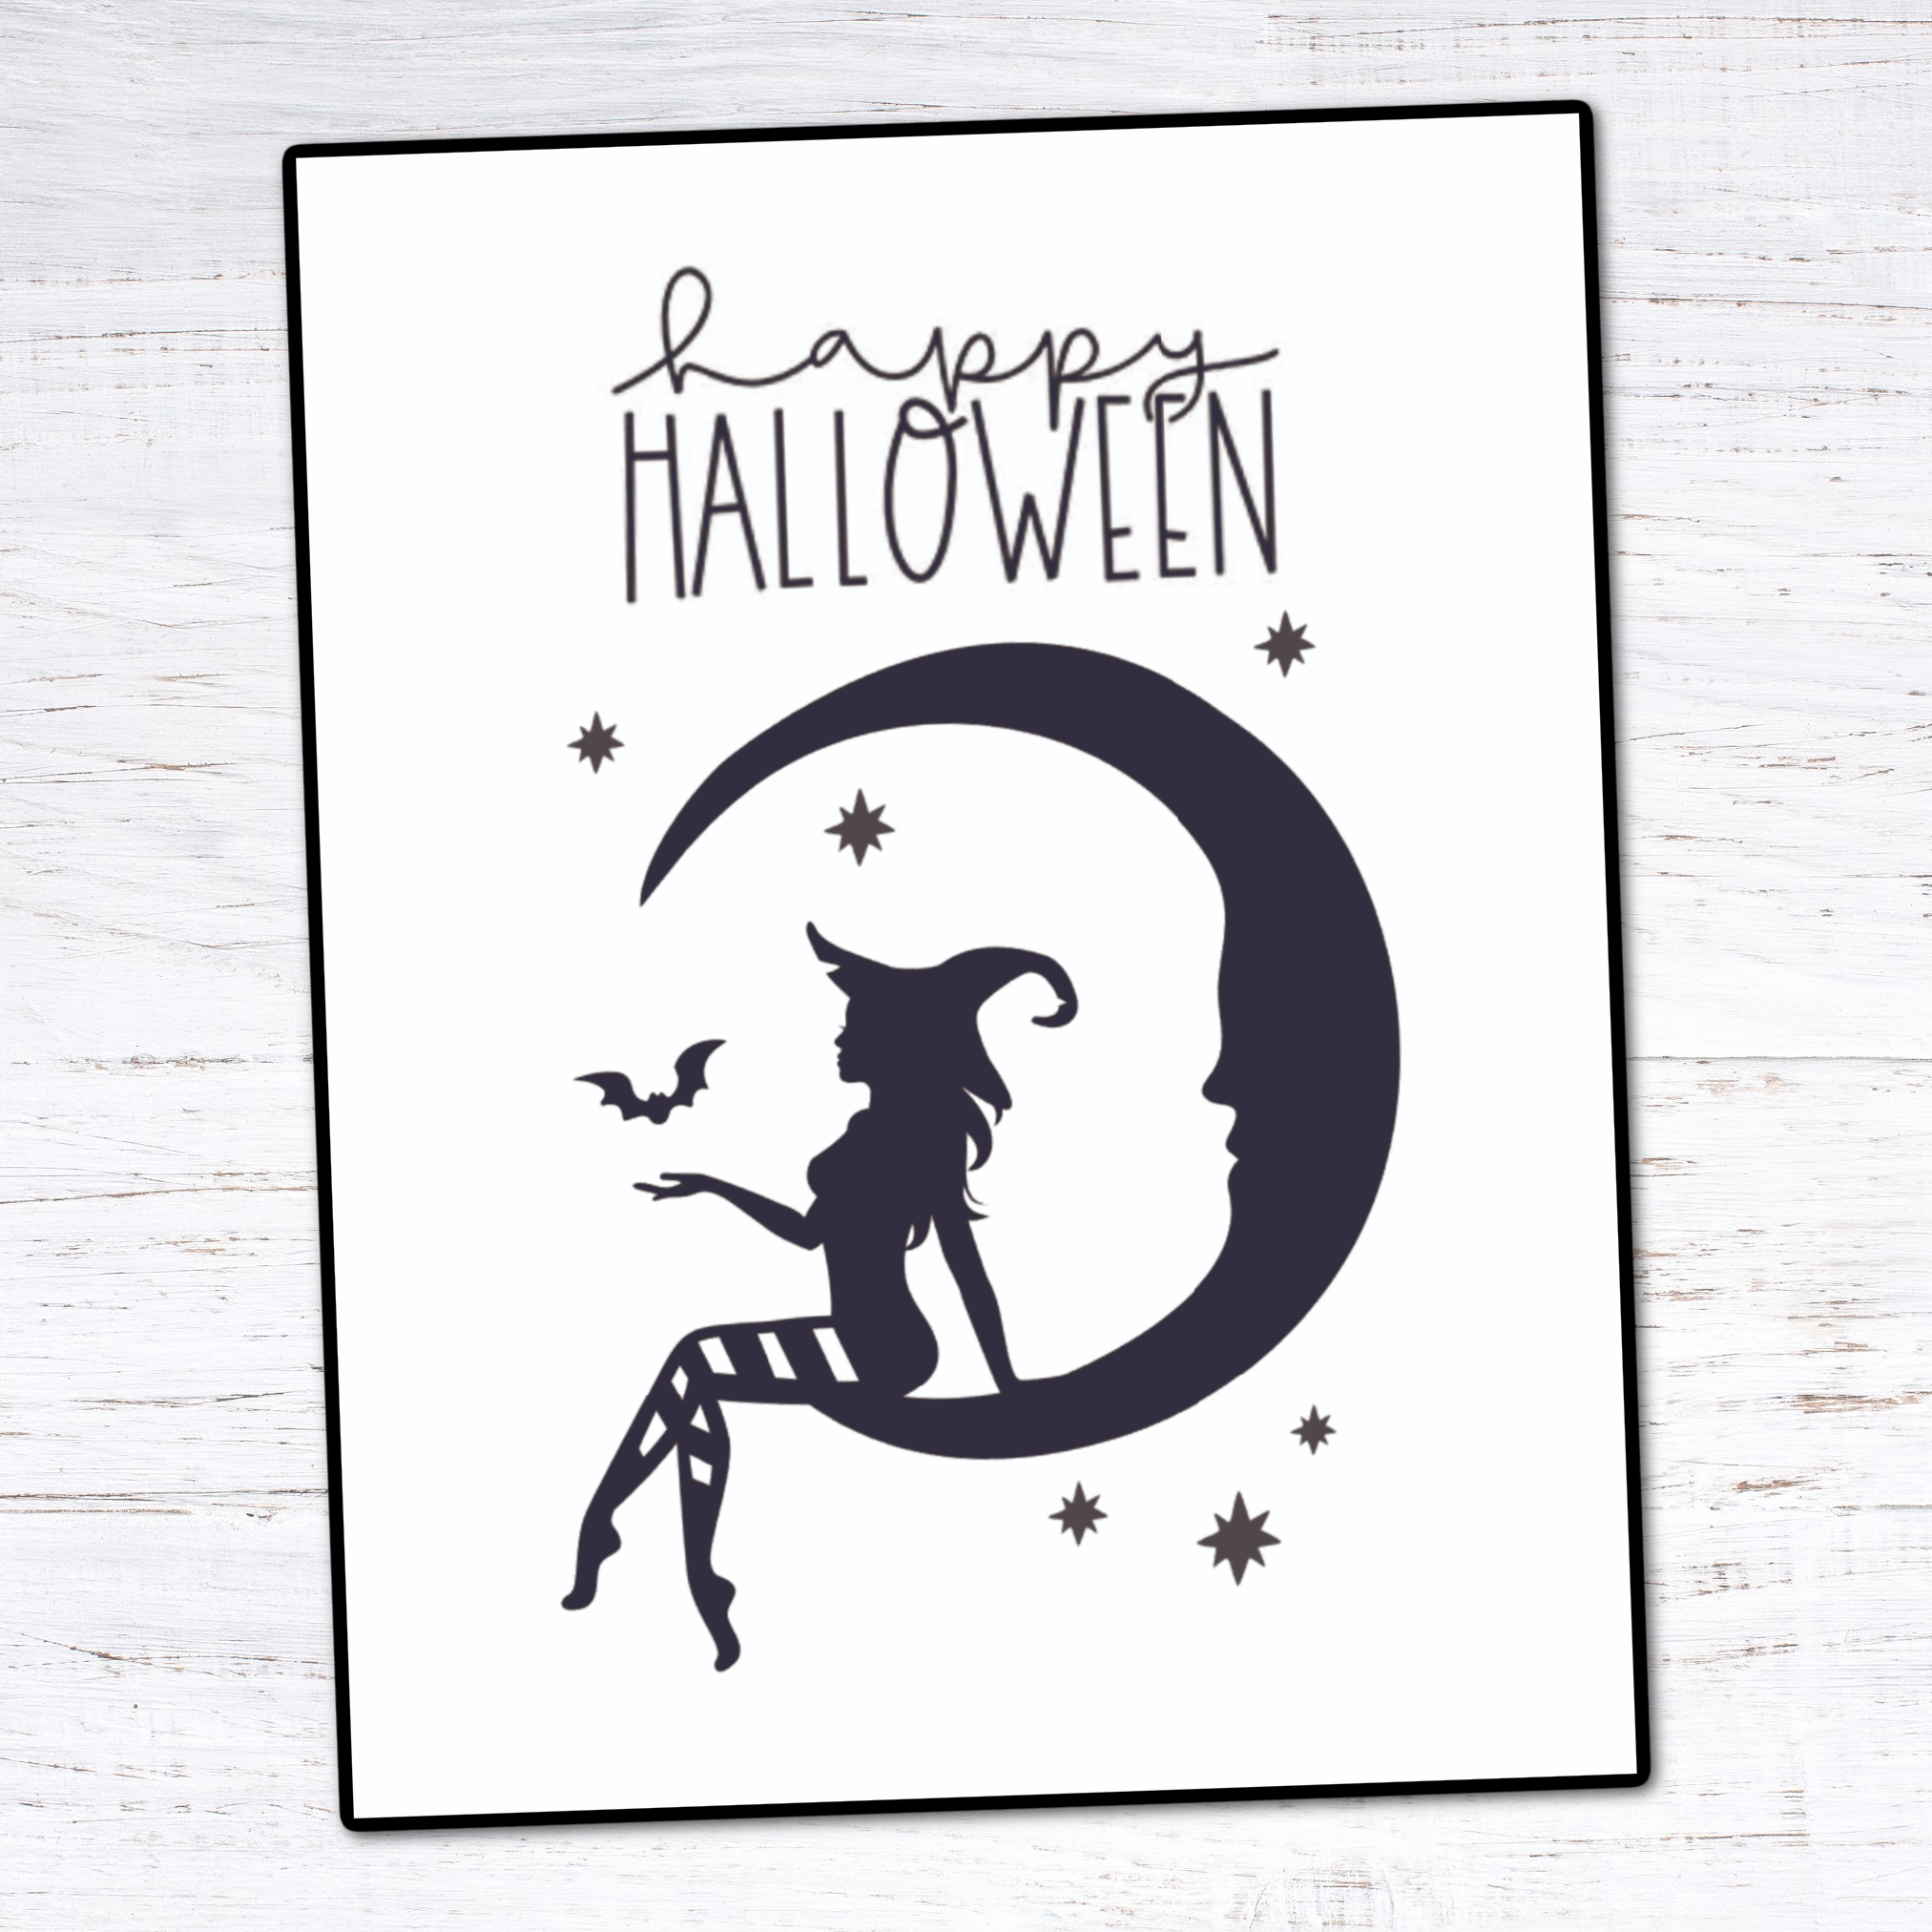 Happy Halloween Witch Printable - The Krafty Planner .png